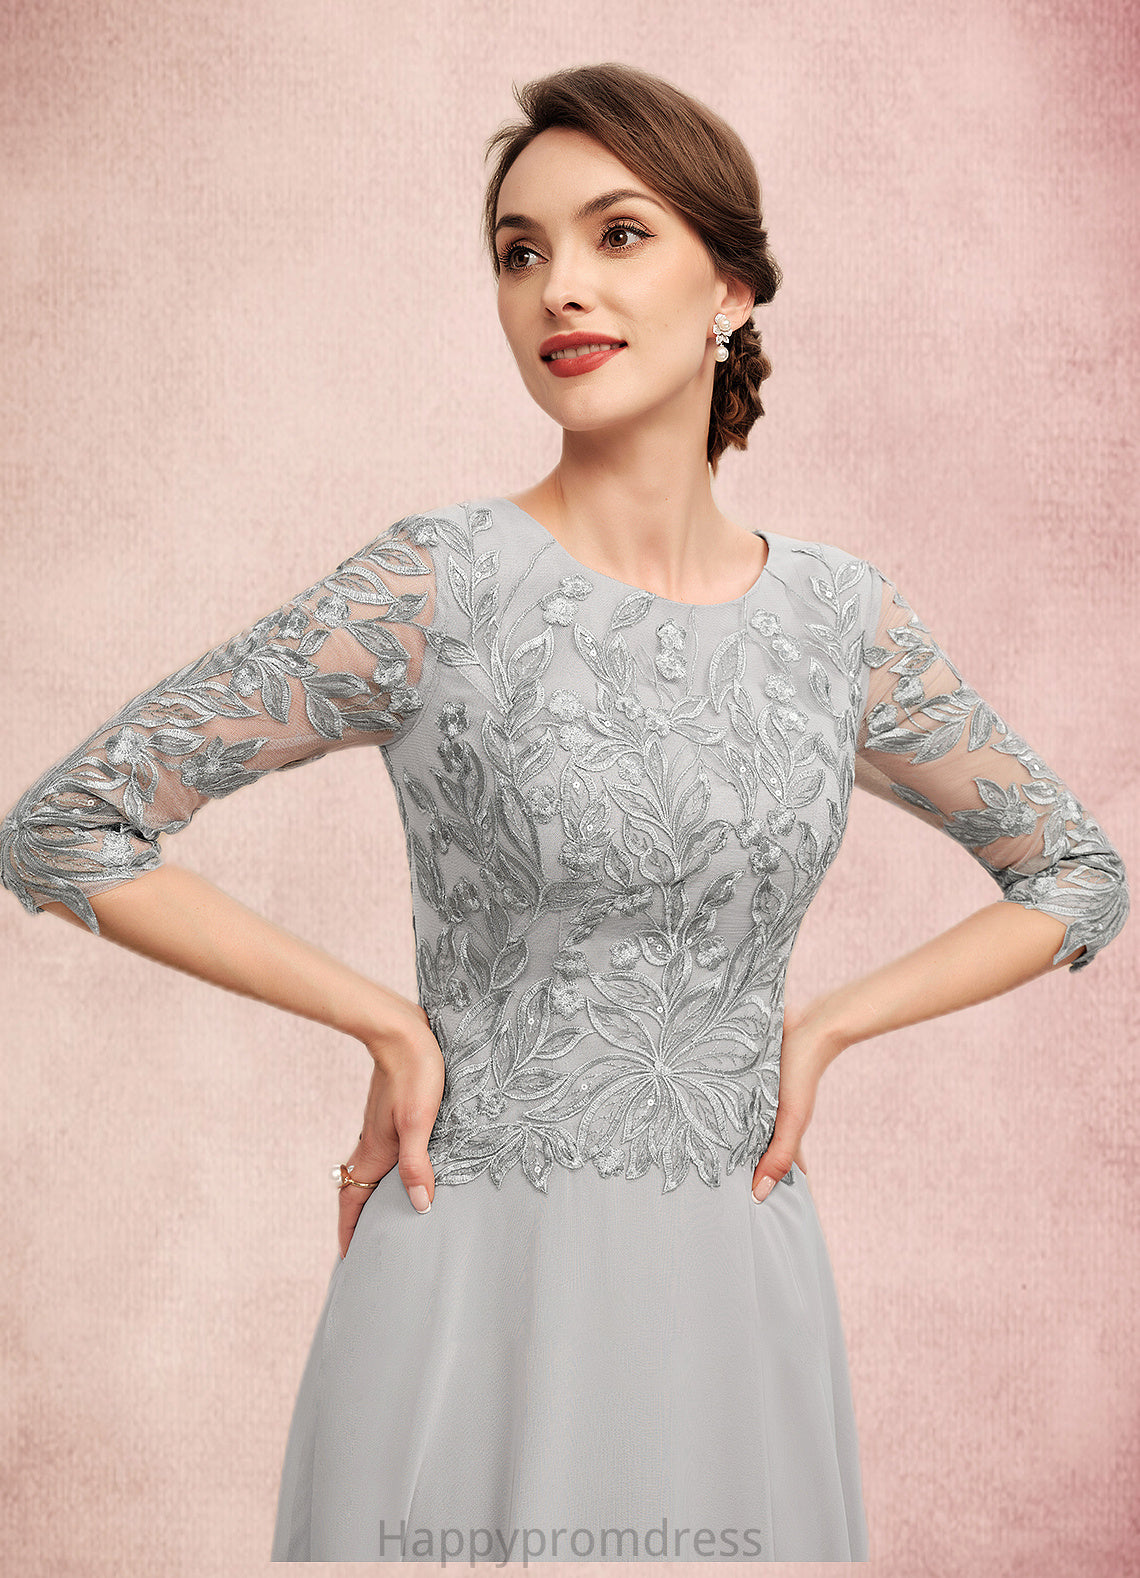 Kaylynn A-Line Scoop Neck Tea-Length Chiffon Lace Mother of the Bride Dress With Sequins XXS126P0014580